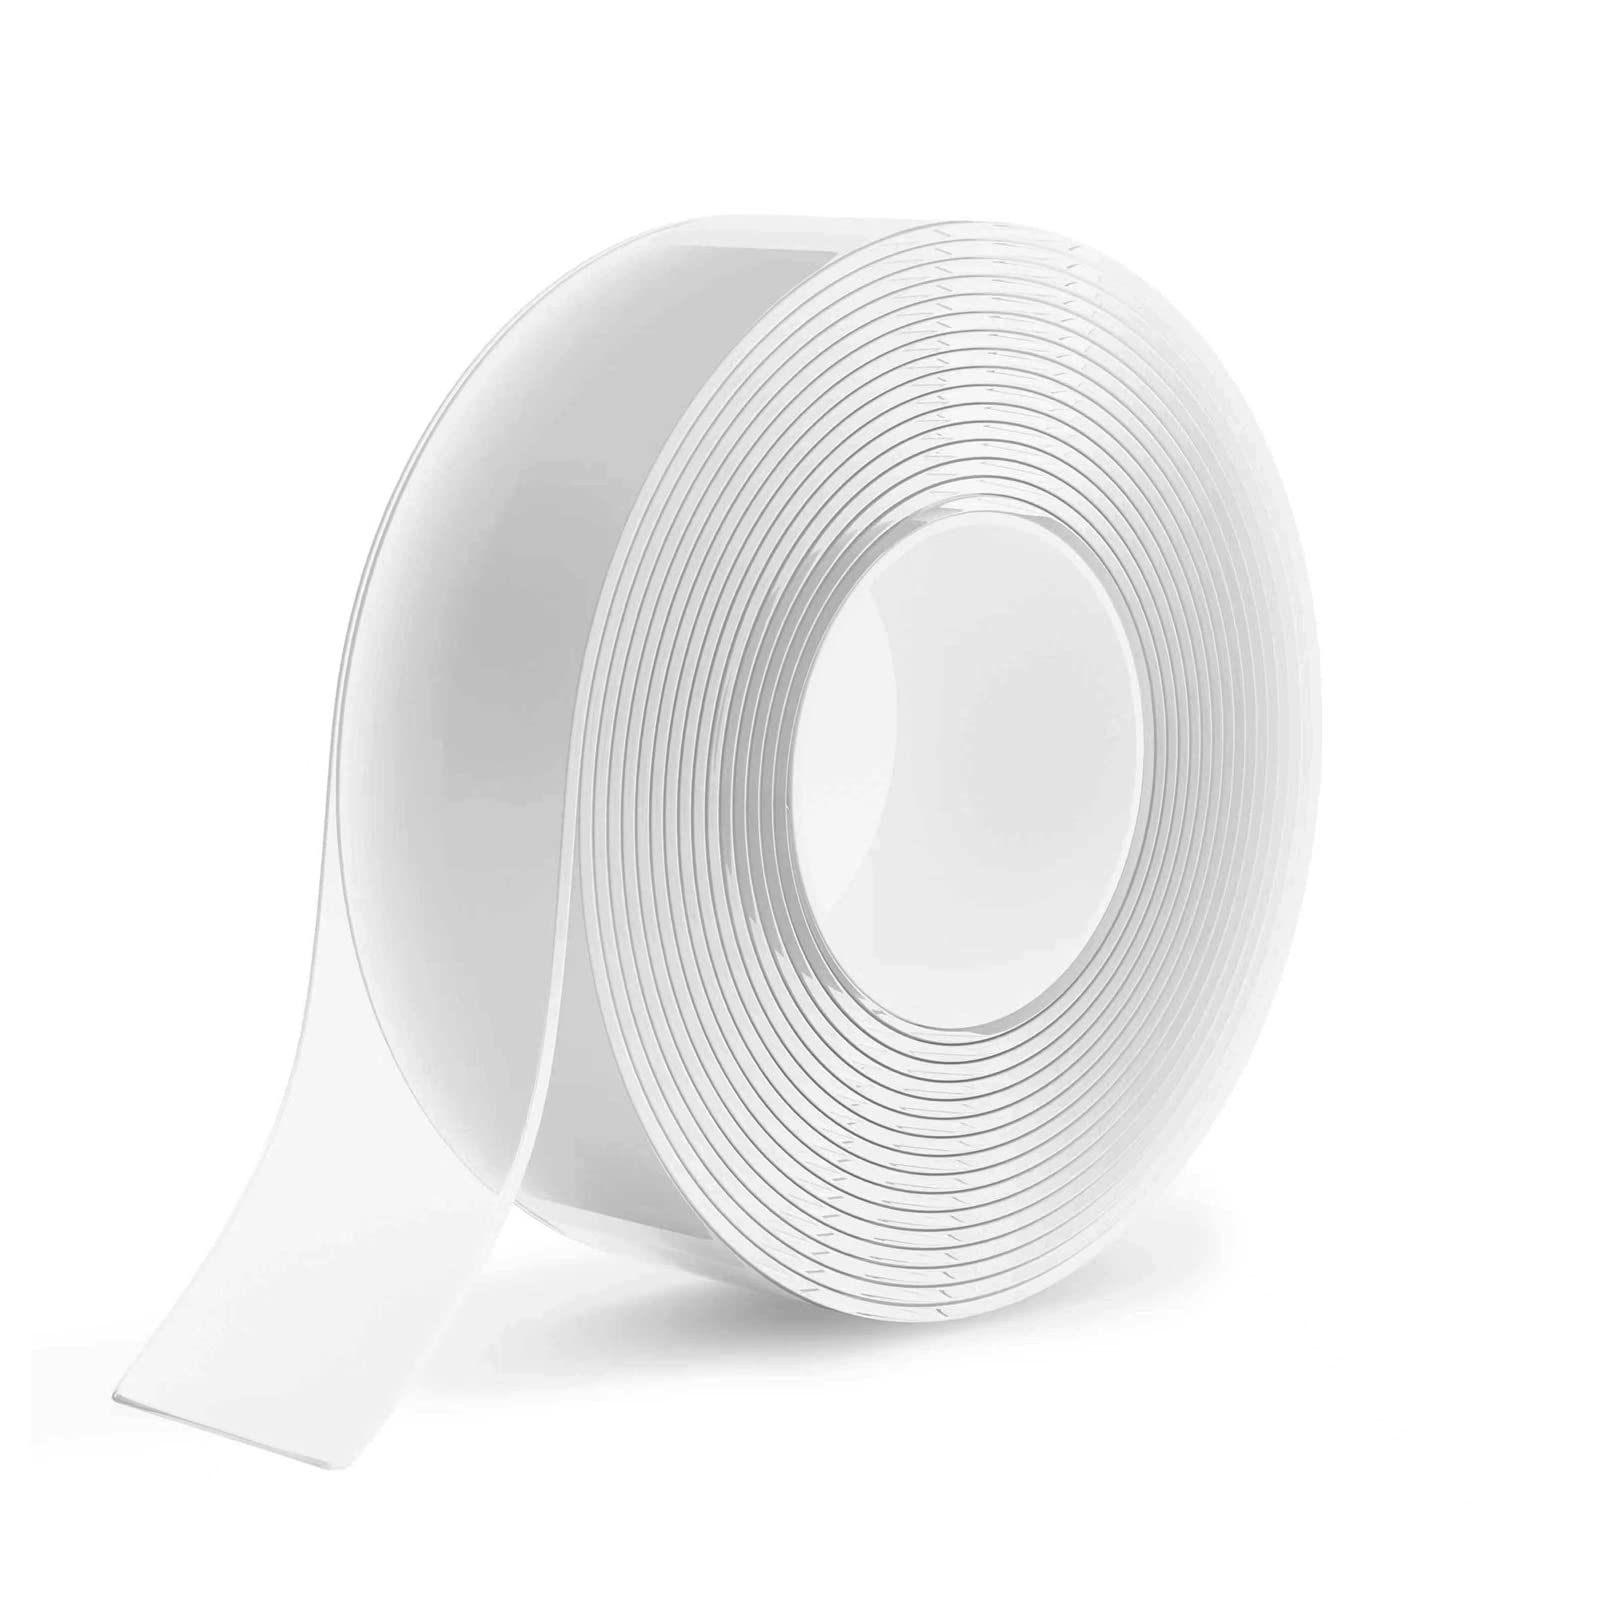 Double Sided Nano Tape 1.2 Inch x 16.5 Feet Strong Mounting Tape